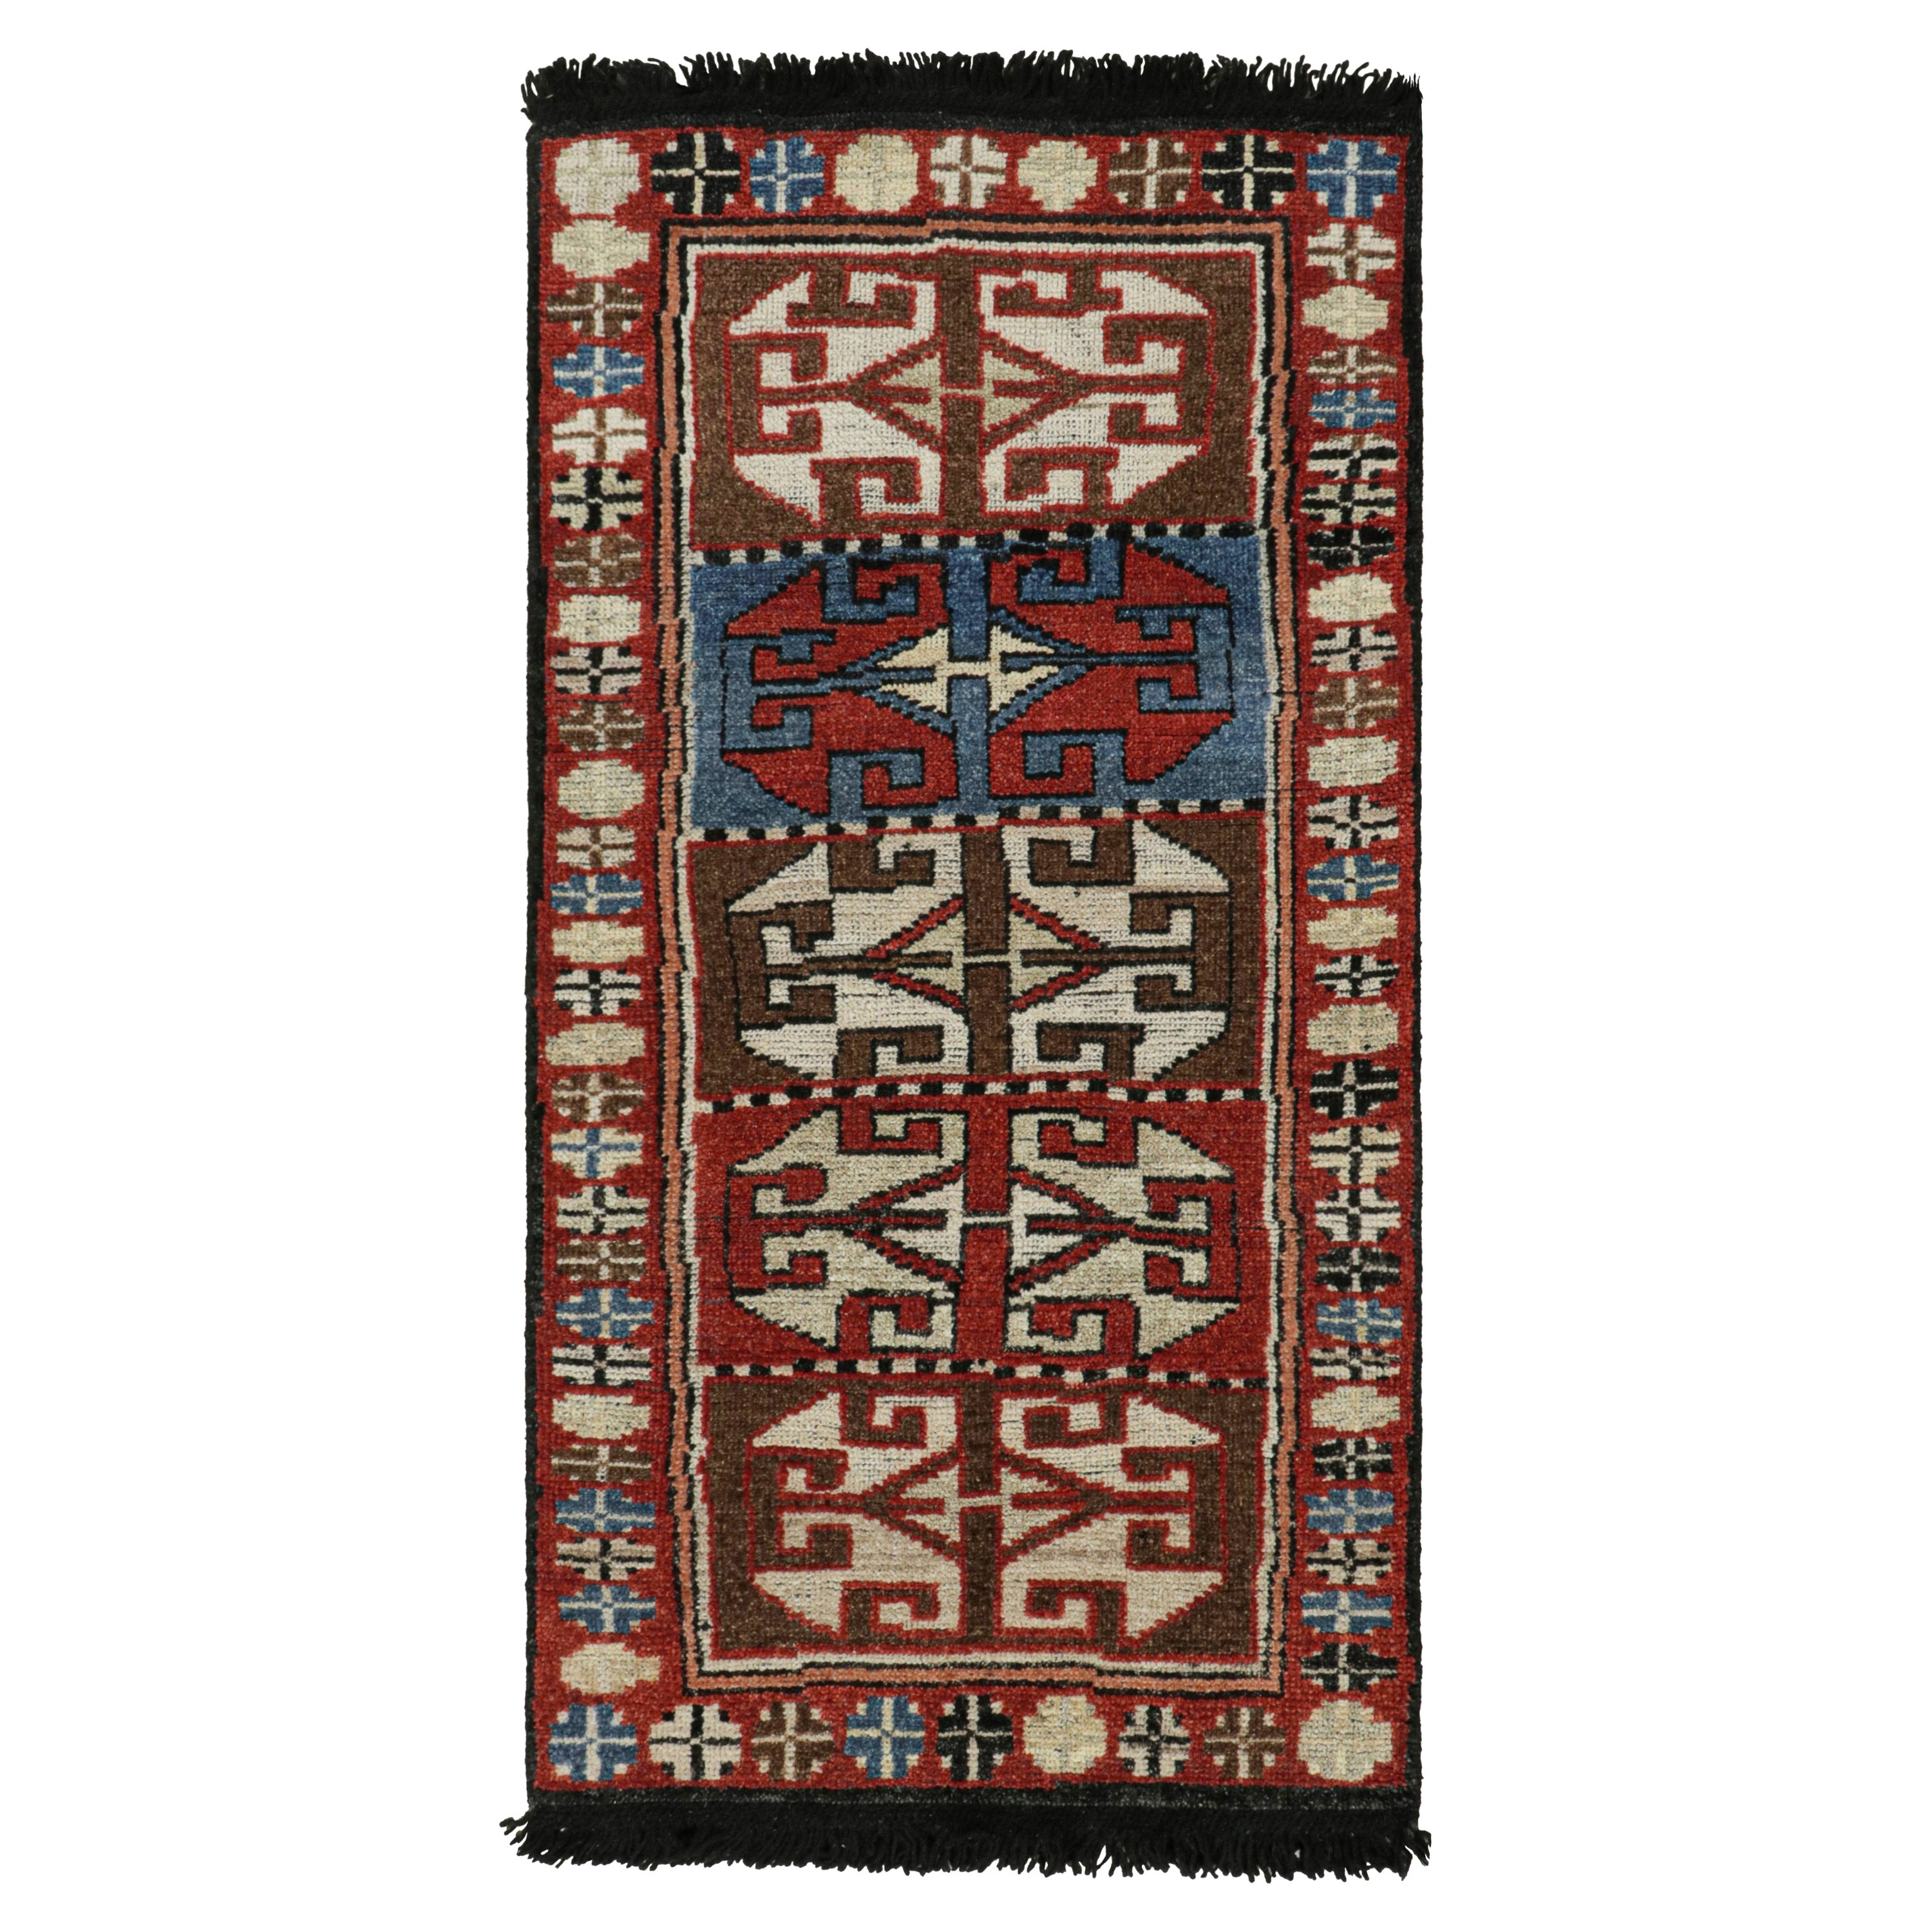 Rug & Kilim’s Antique Tribal Style Rug in Red, Blue & Brown Patterns